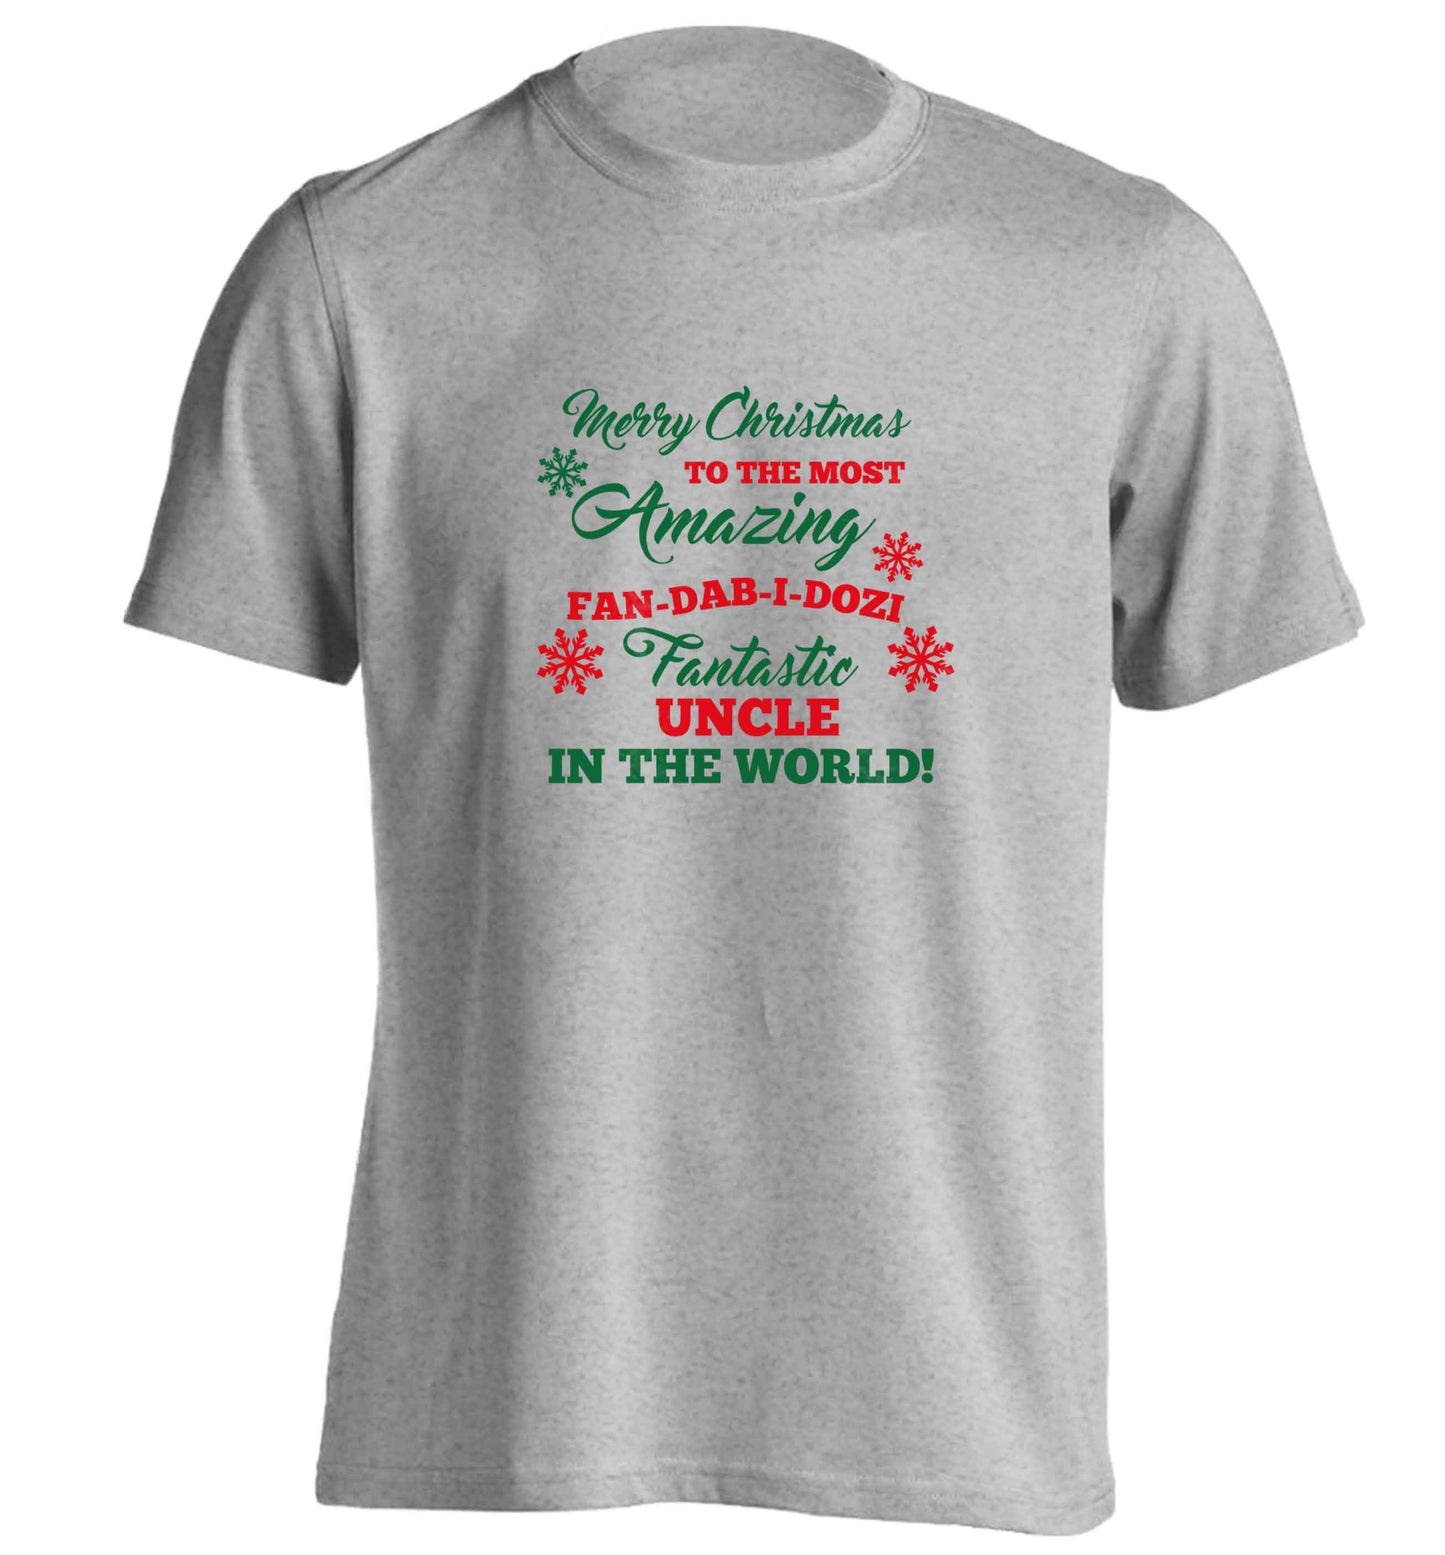 Merry Christmas to the most amazing fan-dab-i-dozi fantasic Uncle in the world adults unisex grey Tshirt 2XL